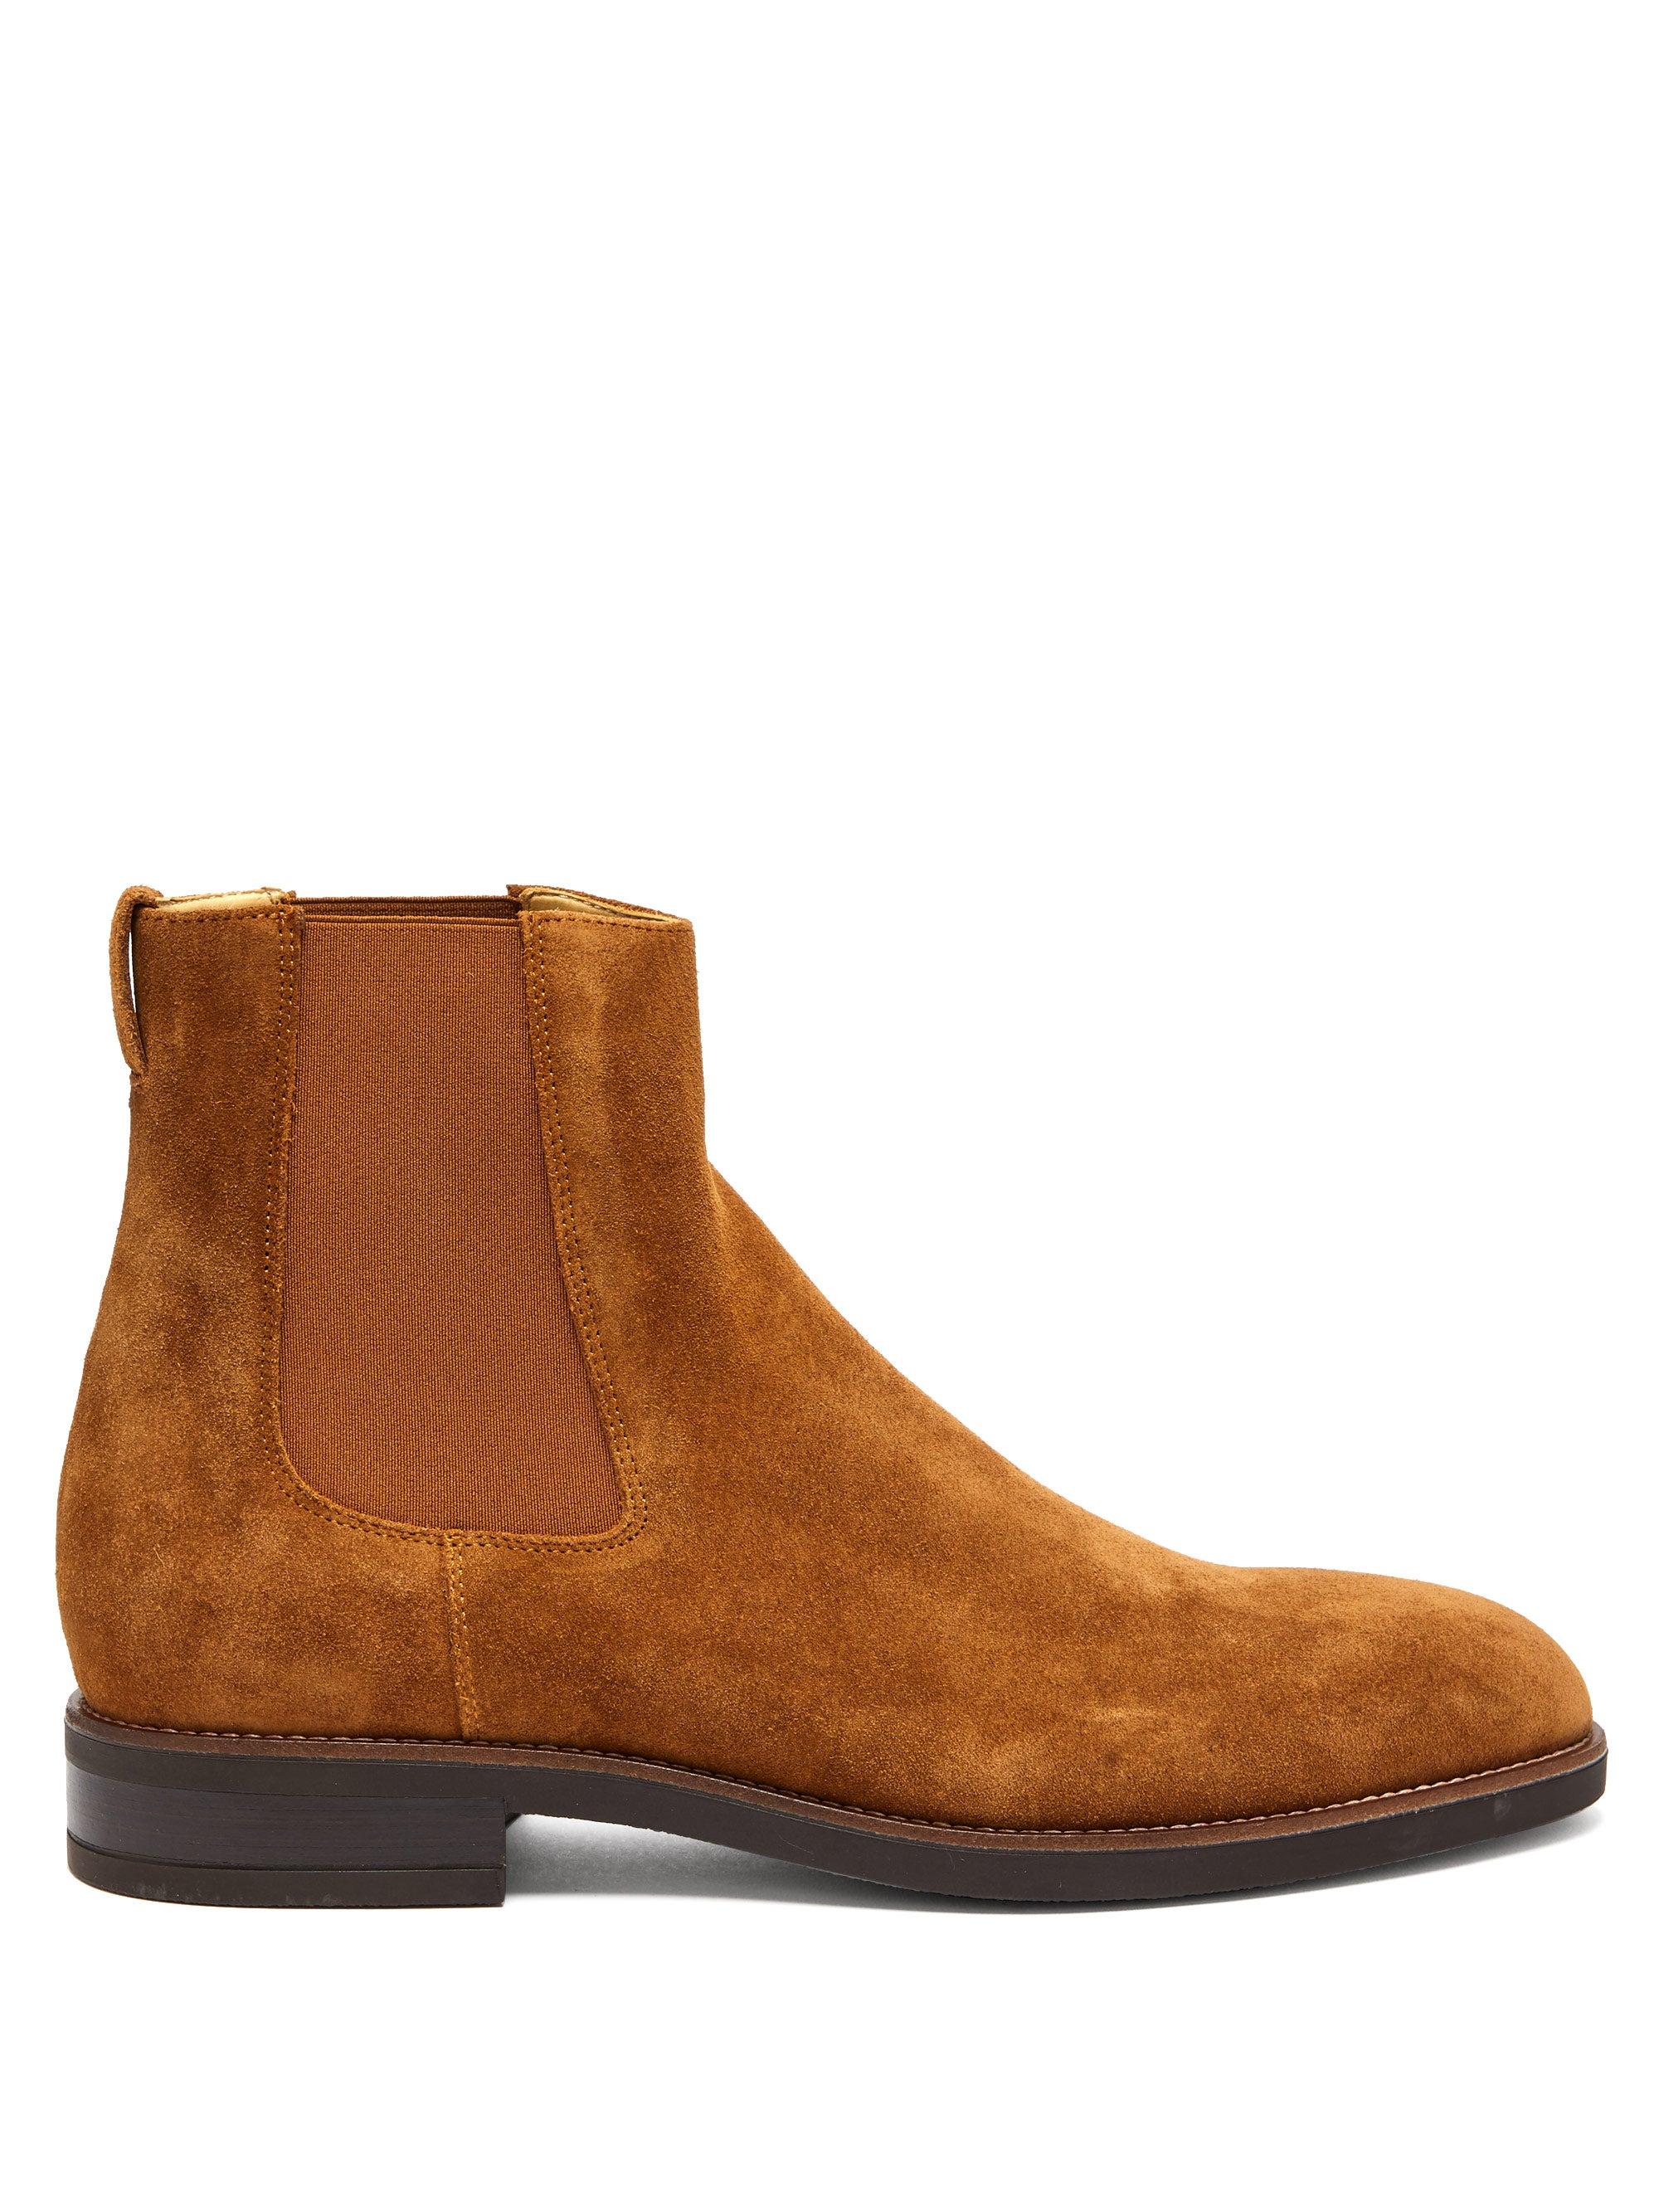 Paul Smith Canon Suede Chelsea Boots in Tan (Brown) for Men - Lyst